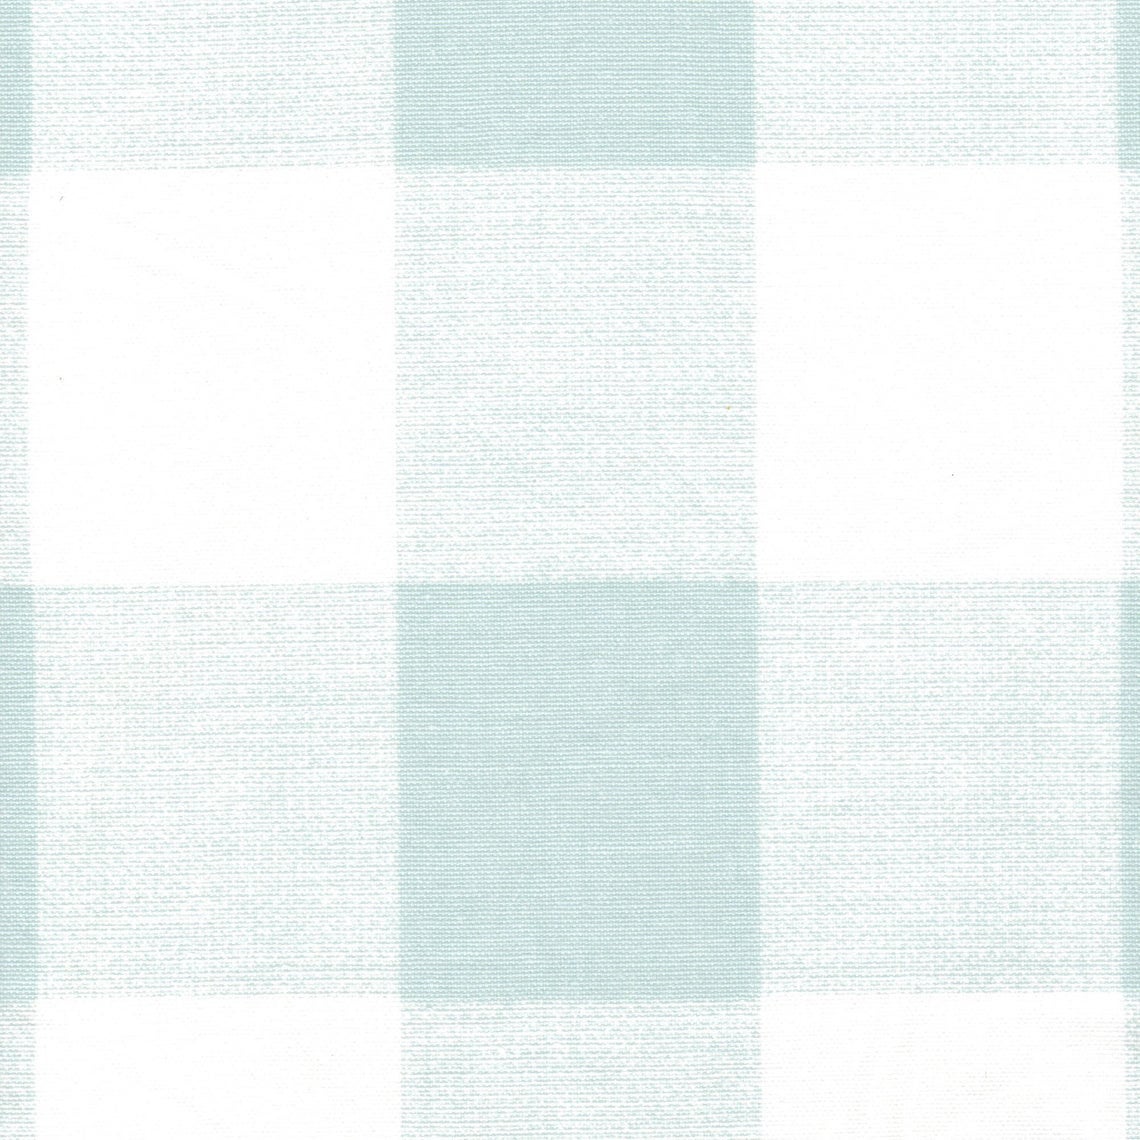 decorative pillows in anderson snowy pale blue-green buffalo check plaid